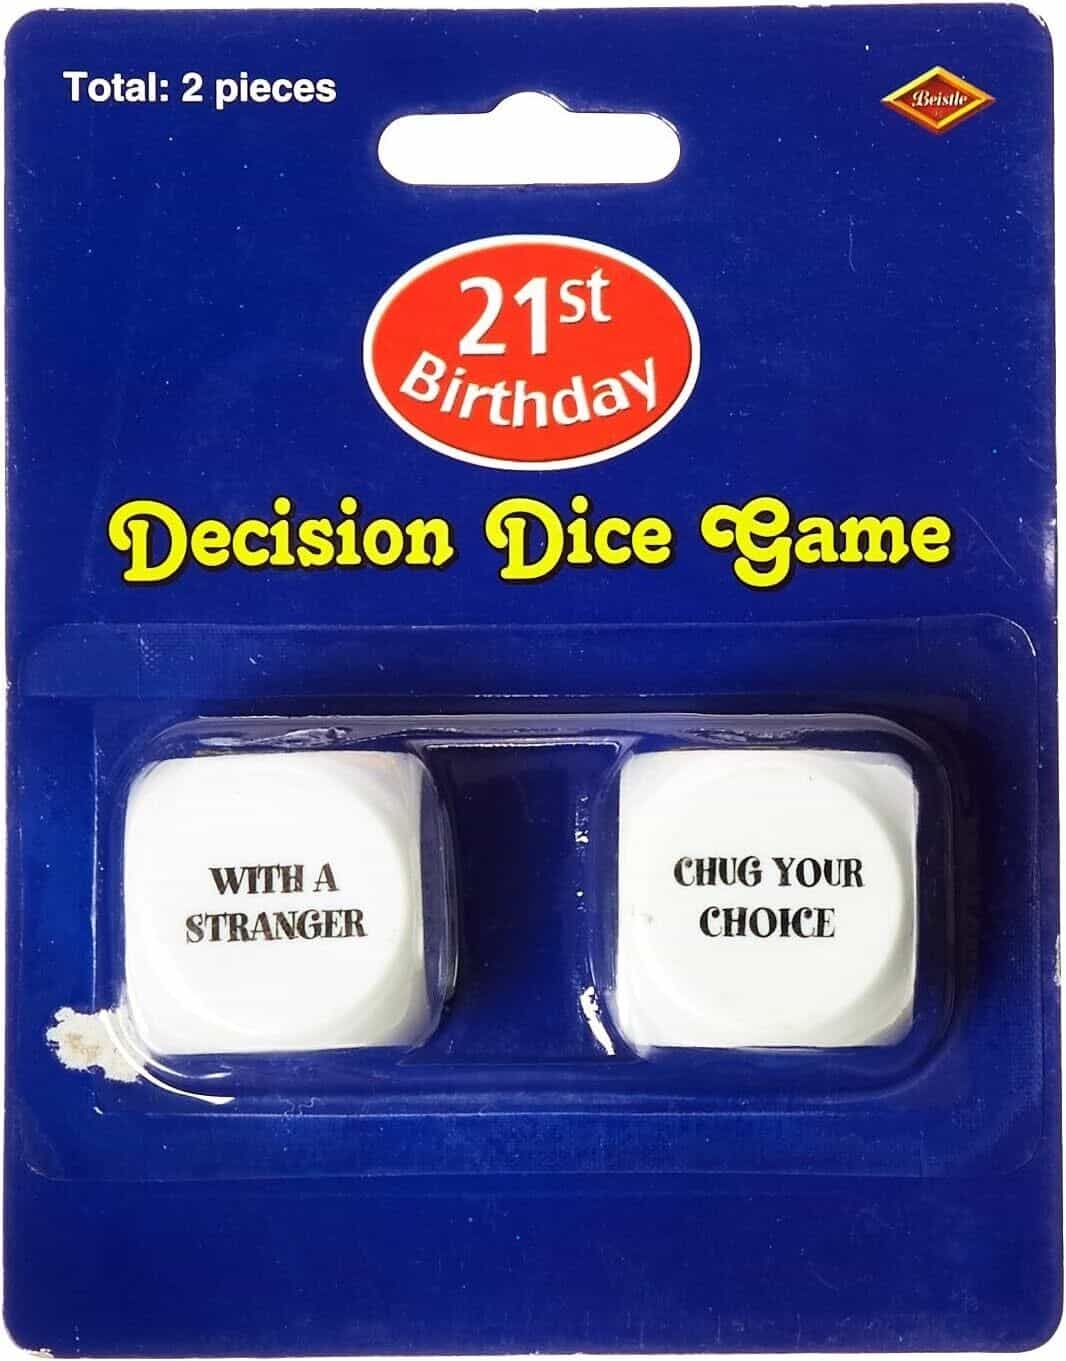 21st Birthday novelty Dice Game by  Beistle